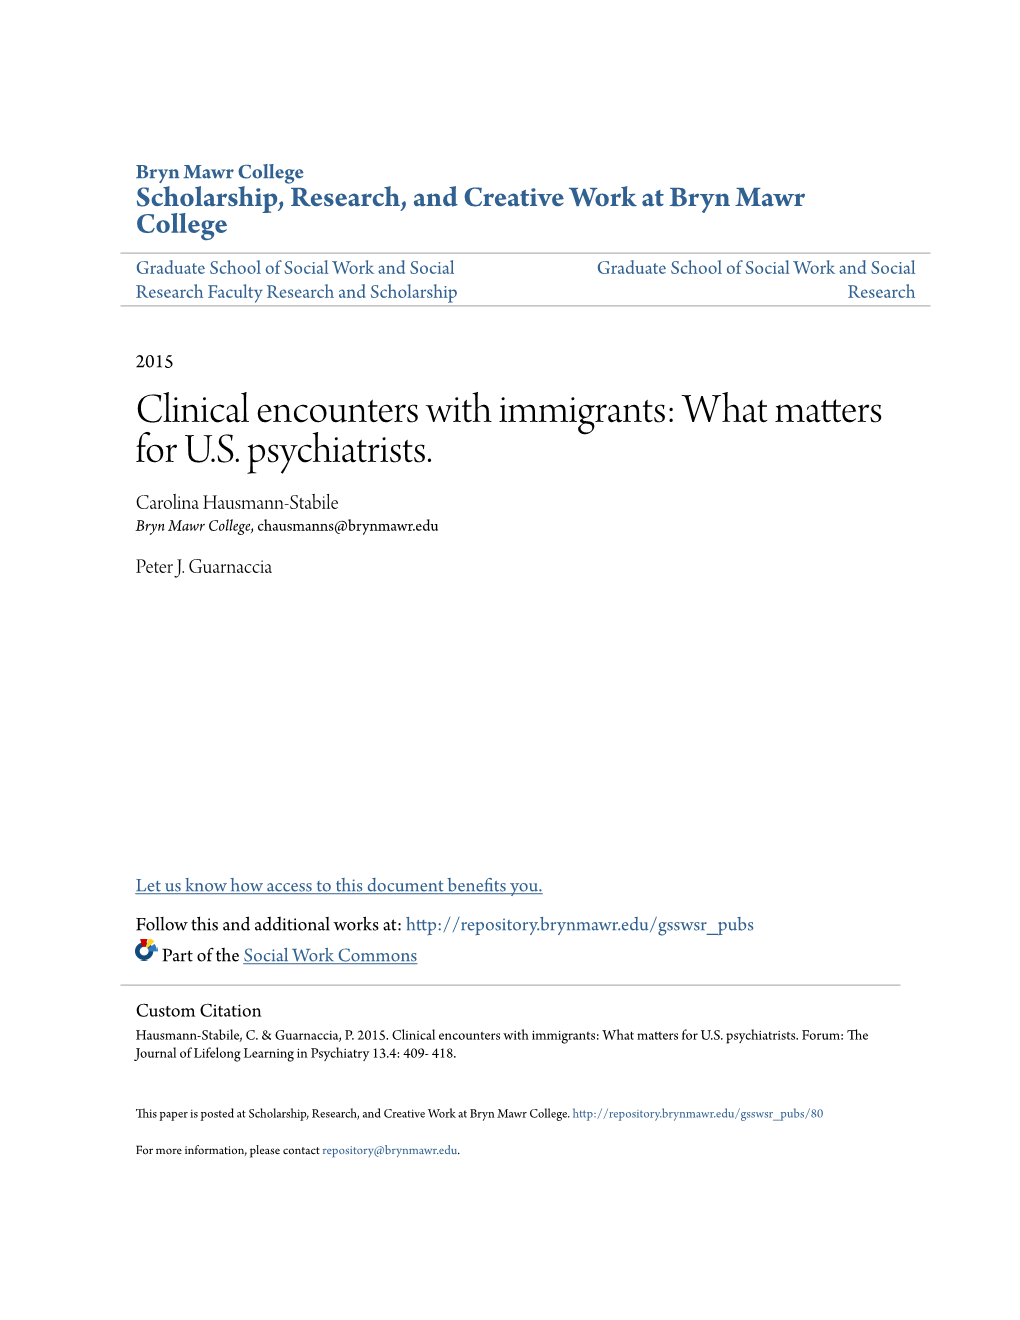 Clinical Encounters with Immigrants: What Matters for U.S